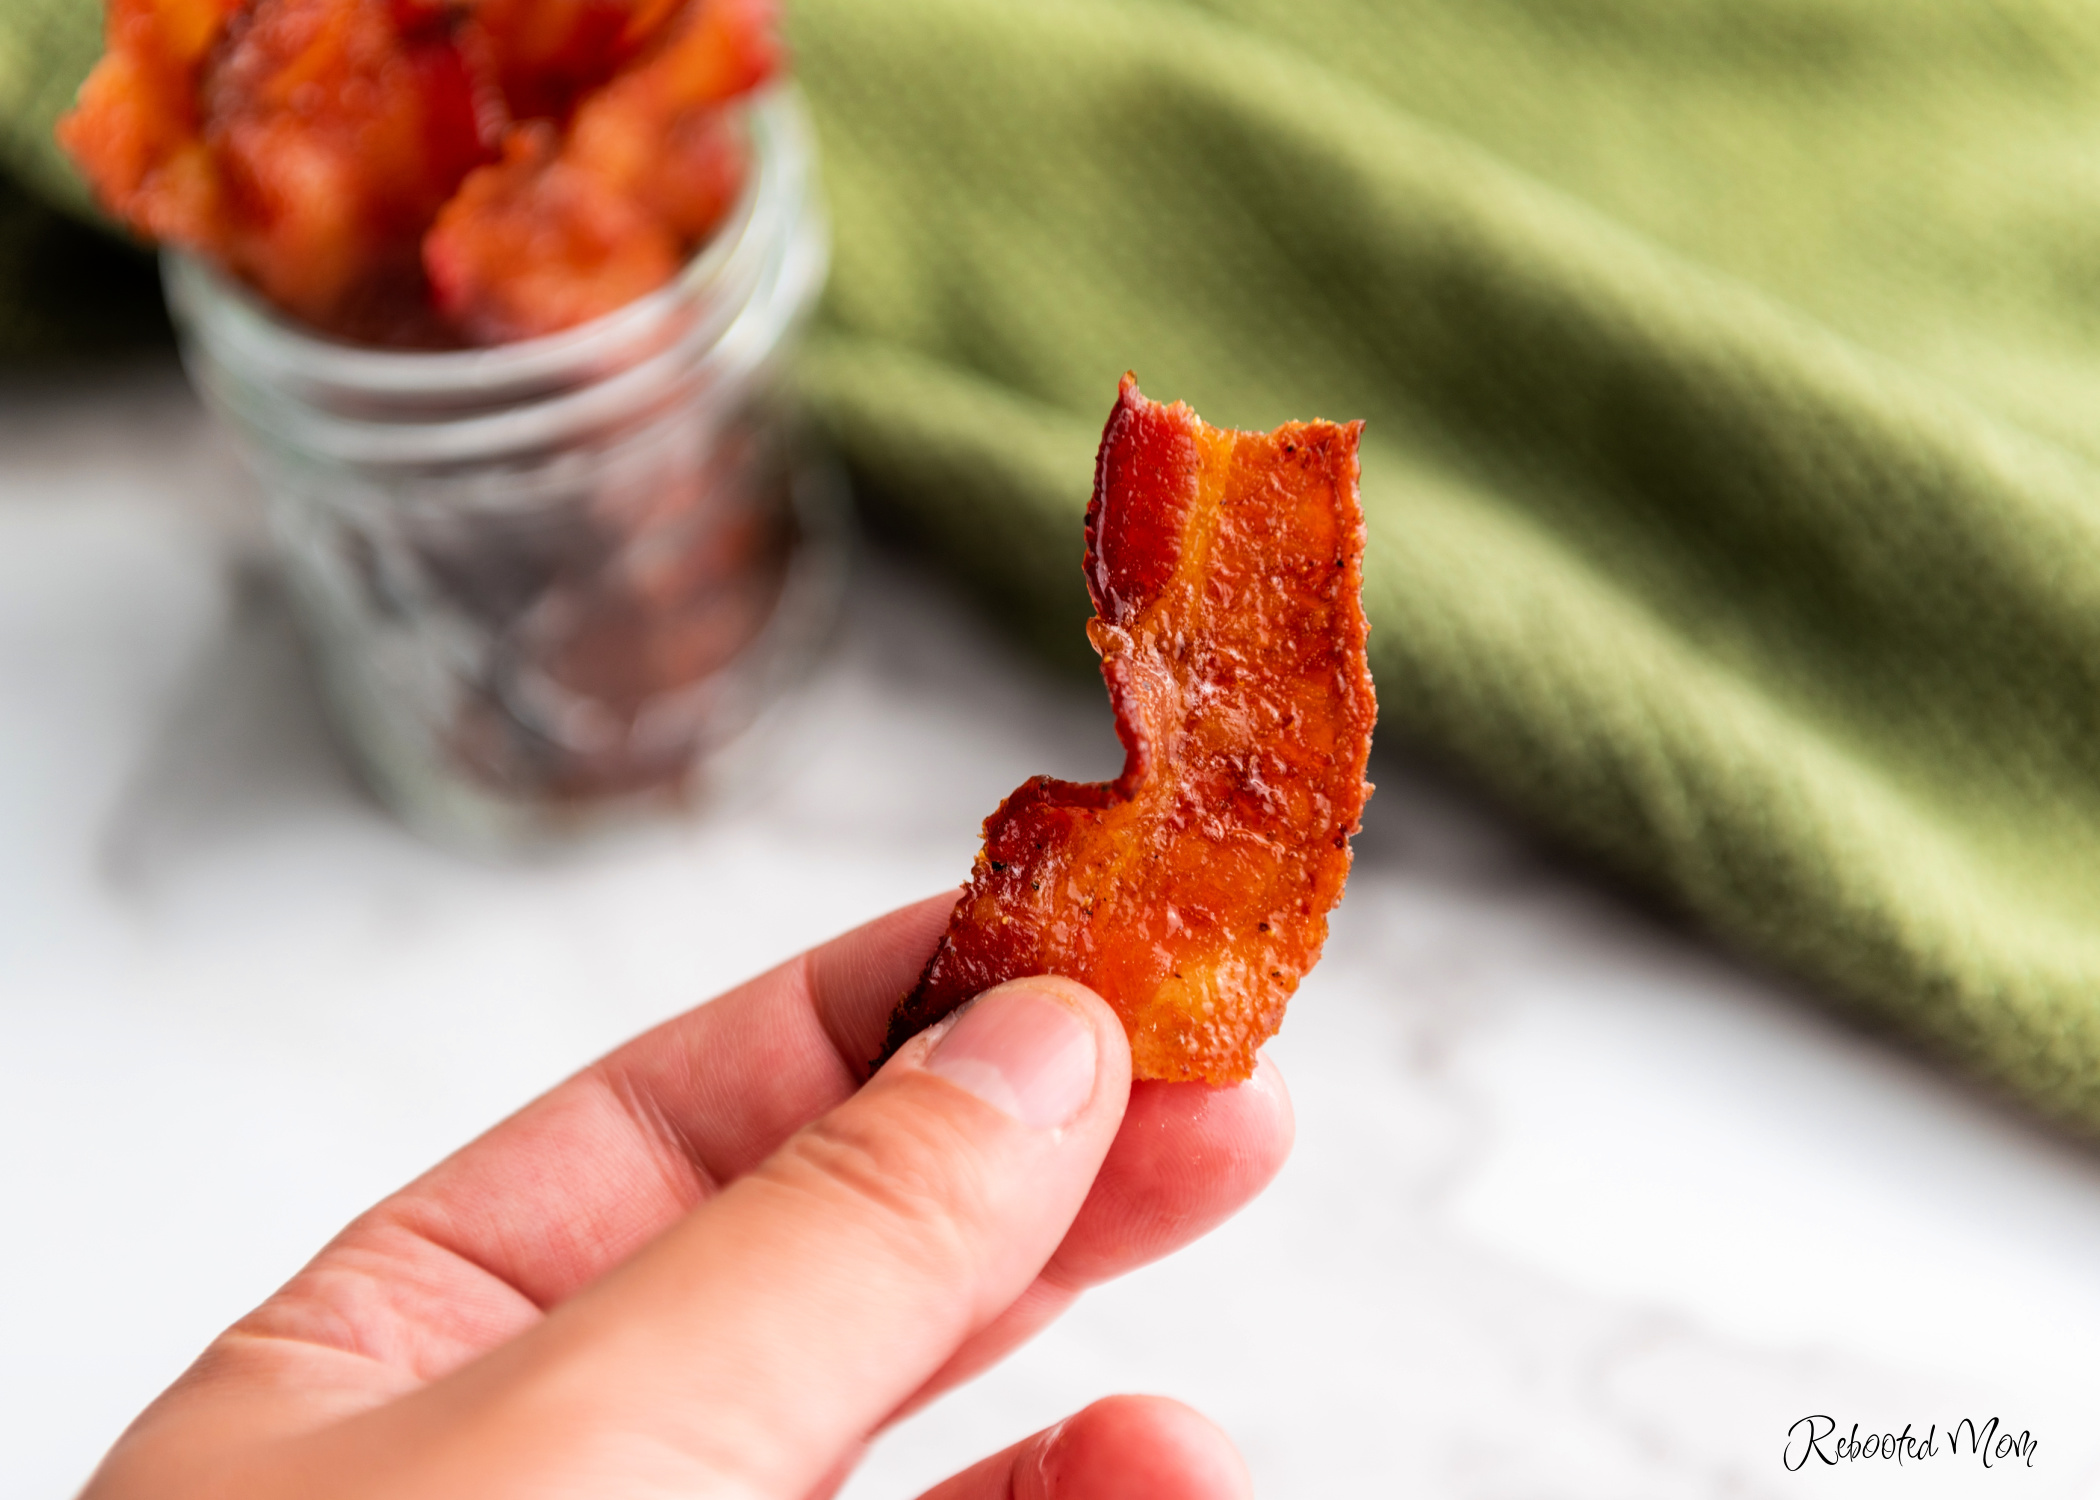 Sweet and savory, this Candied Maple Brown Sugar Bacon is the perfect treat! Follow this recipe to make this simple treat that everyone will love!